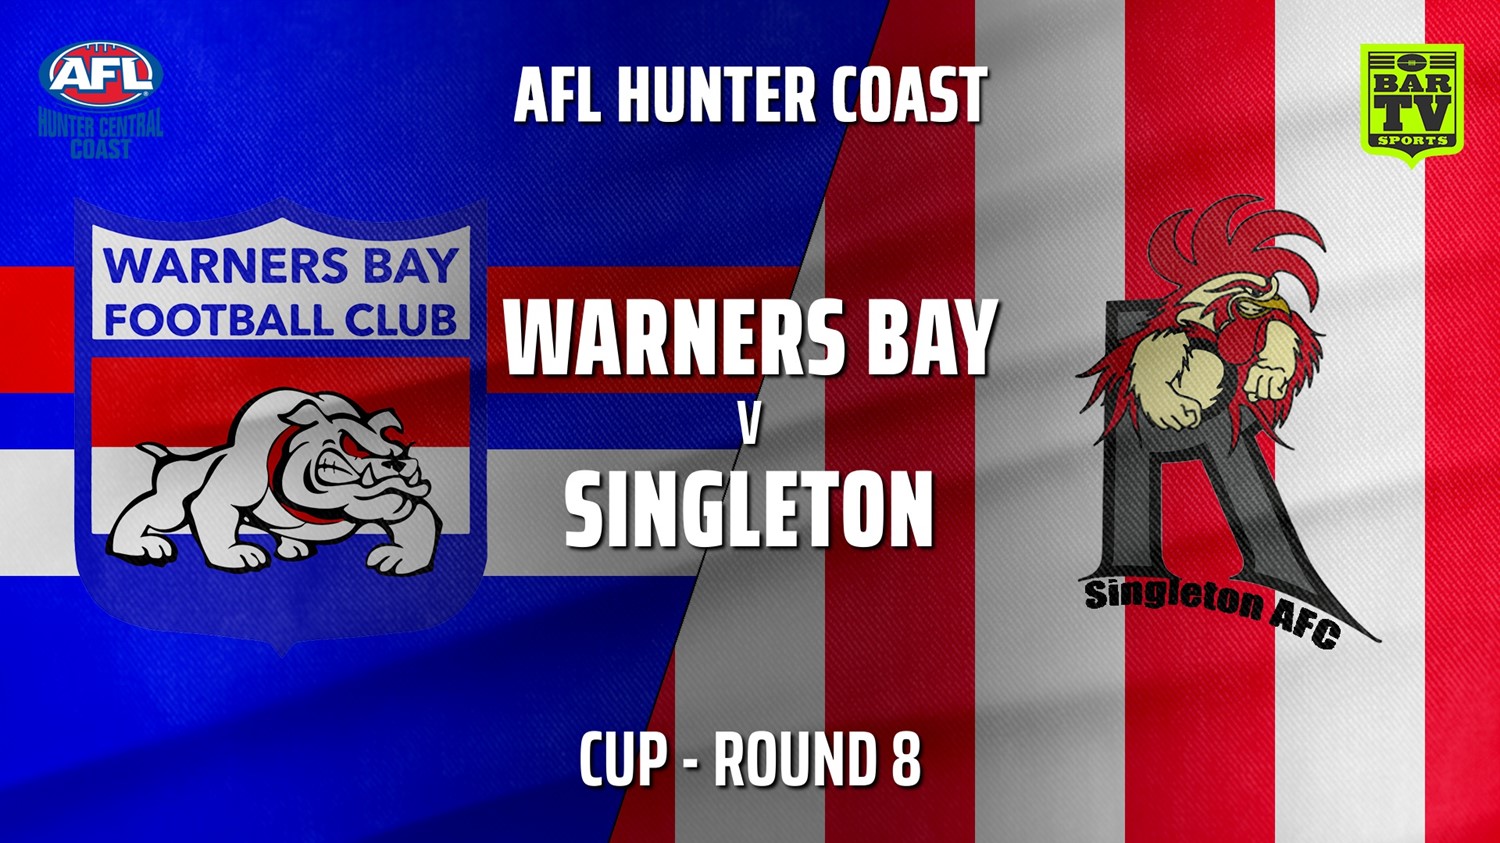 210605-AFL HCC Round 8 - Cup - Warners Bay Bulldogs v Singleton Roosters Minigame Slate Image